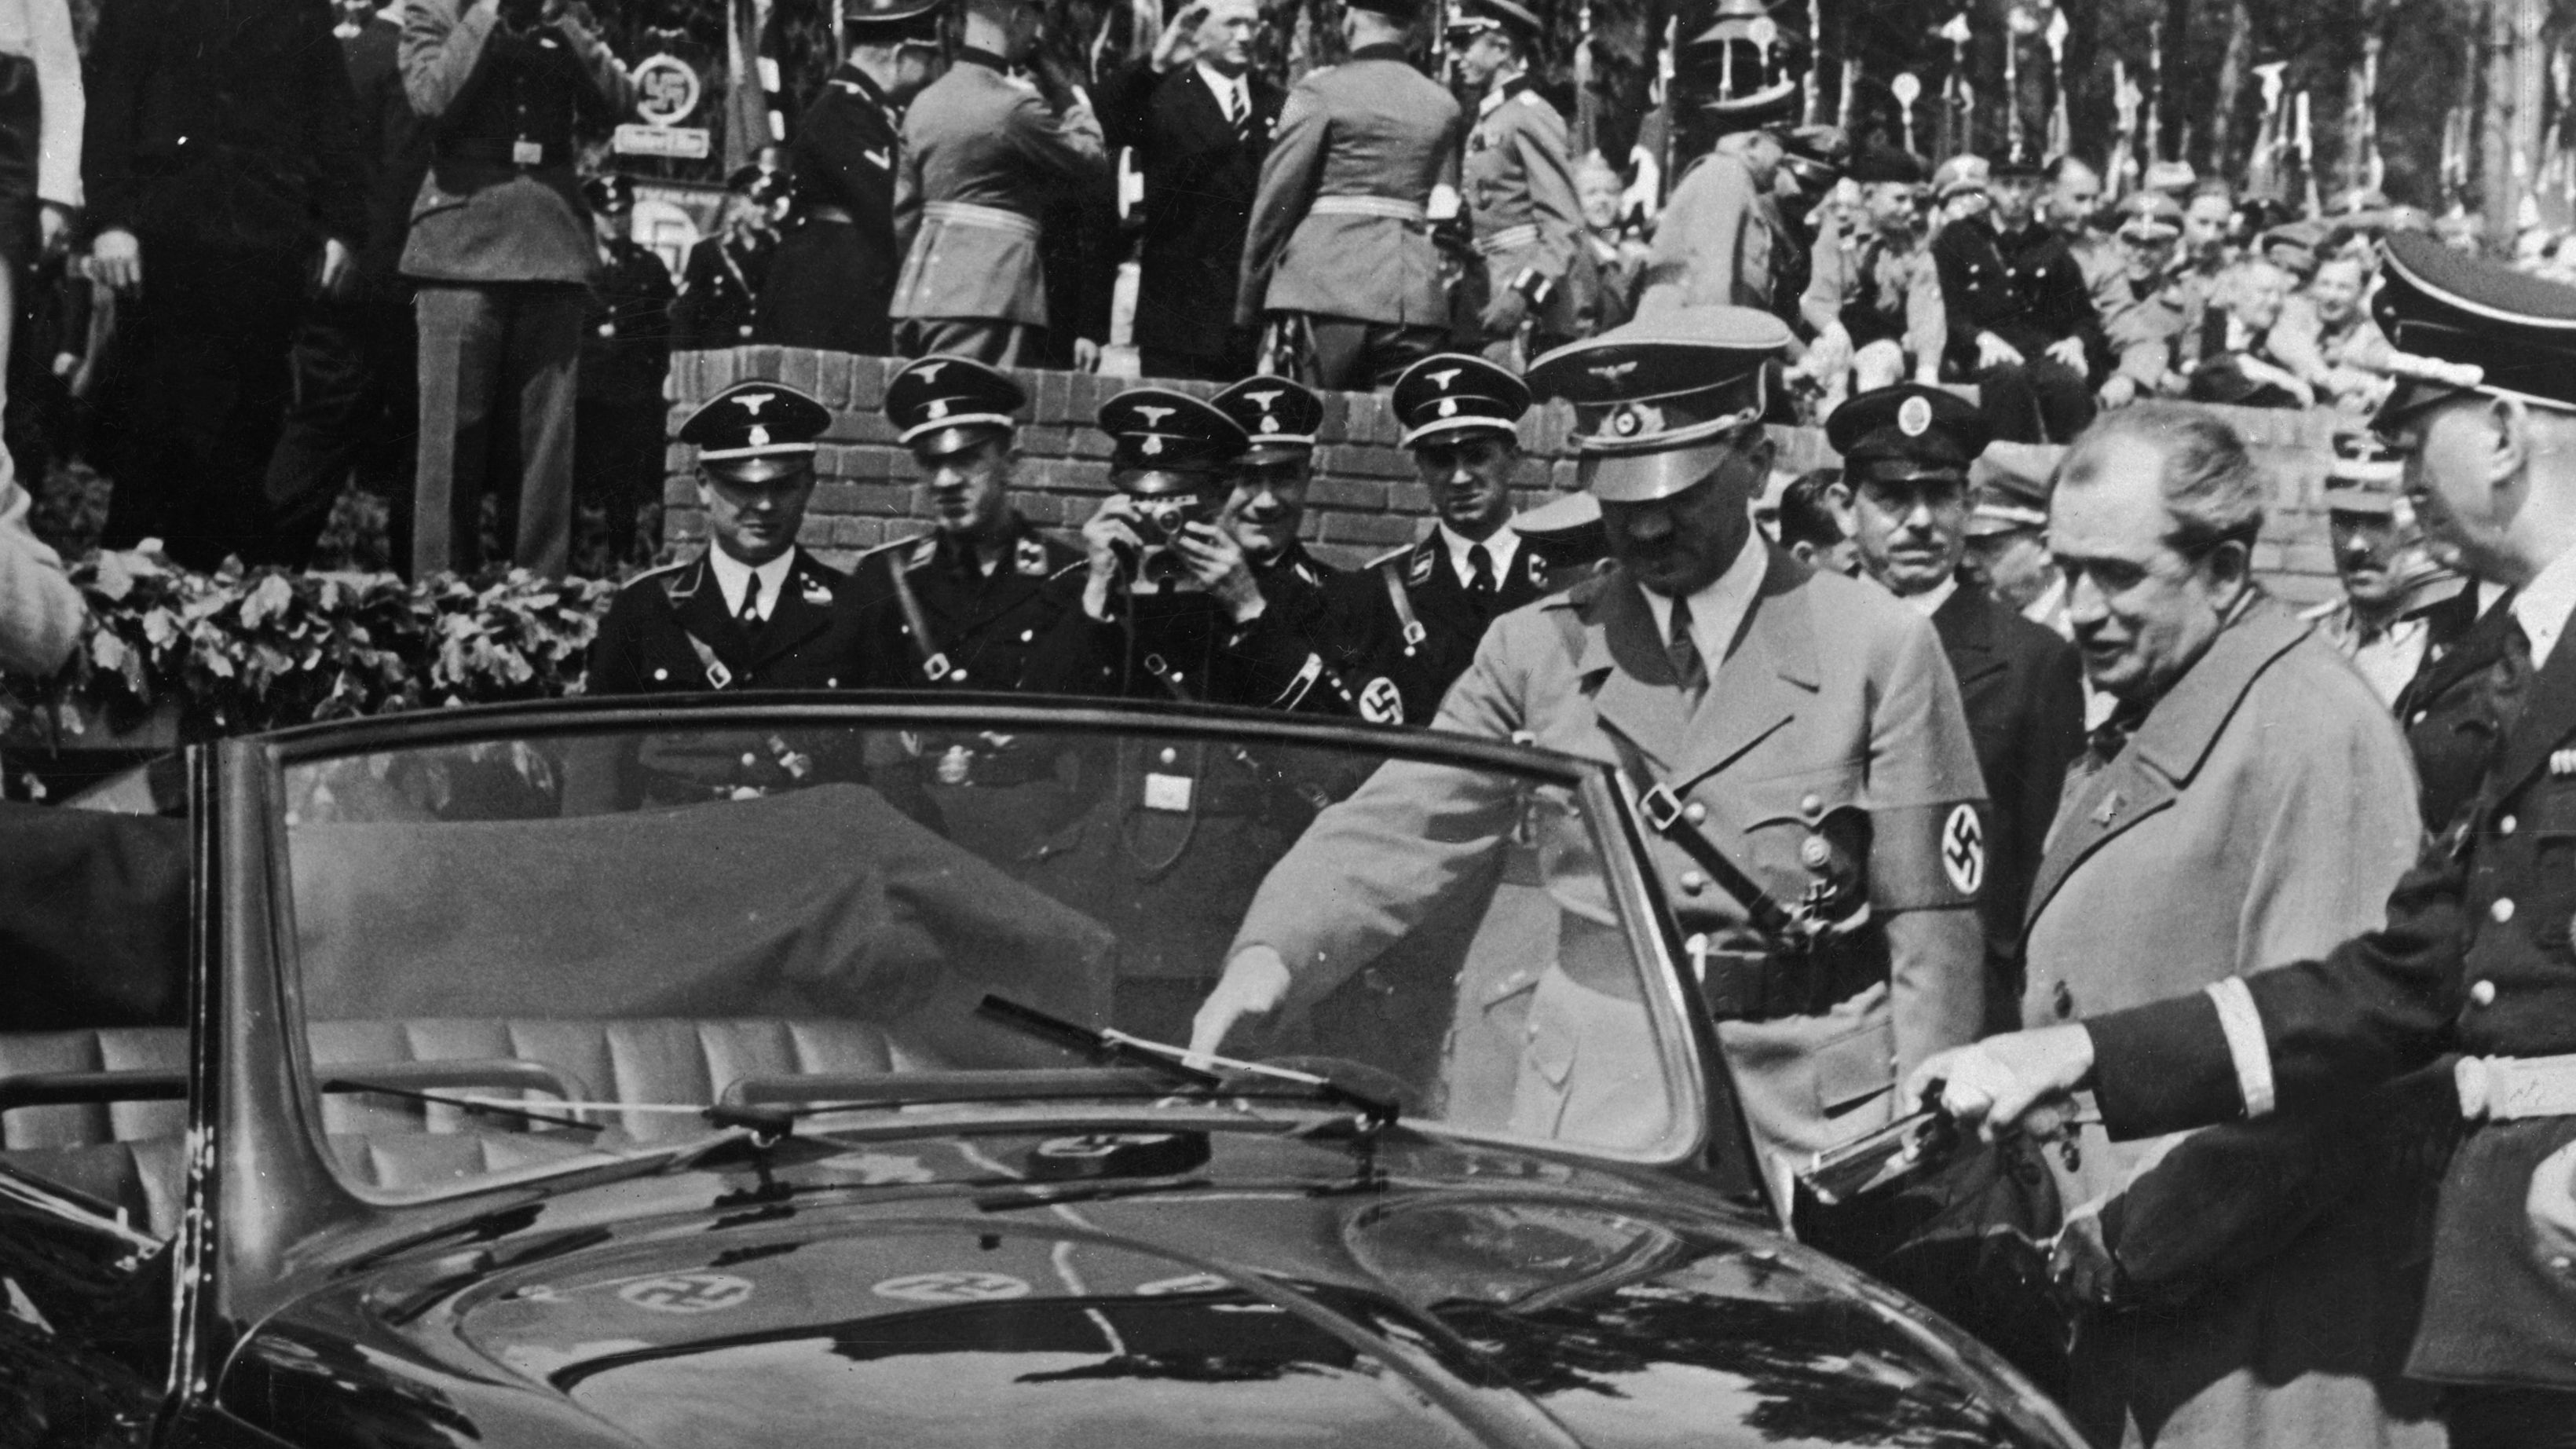 Ferdinand Porsche presents a new convertible version of the KdF-Wagen to Nazi leader Adolph Hitler in 1938. KdF stood for "Kraft durch Freude" or "strength through joy." Designed to be affordable and easy to operate for ordinary Germans, it was more popularly known as the "people's car," or "Volkswagen."